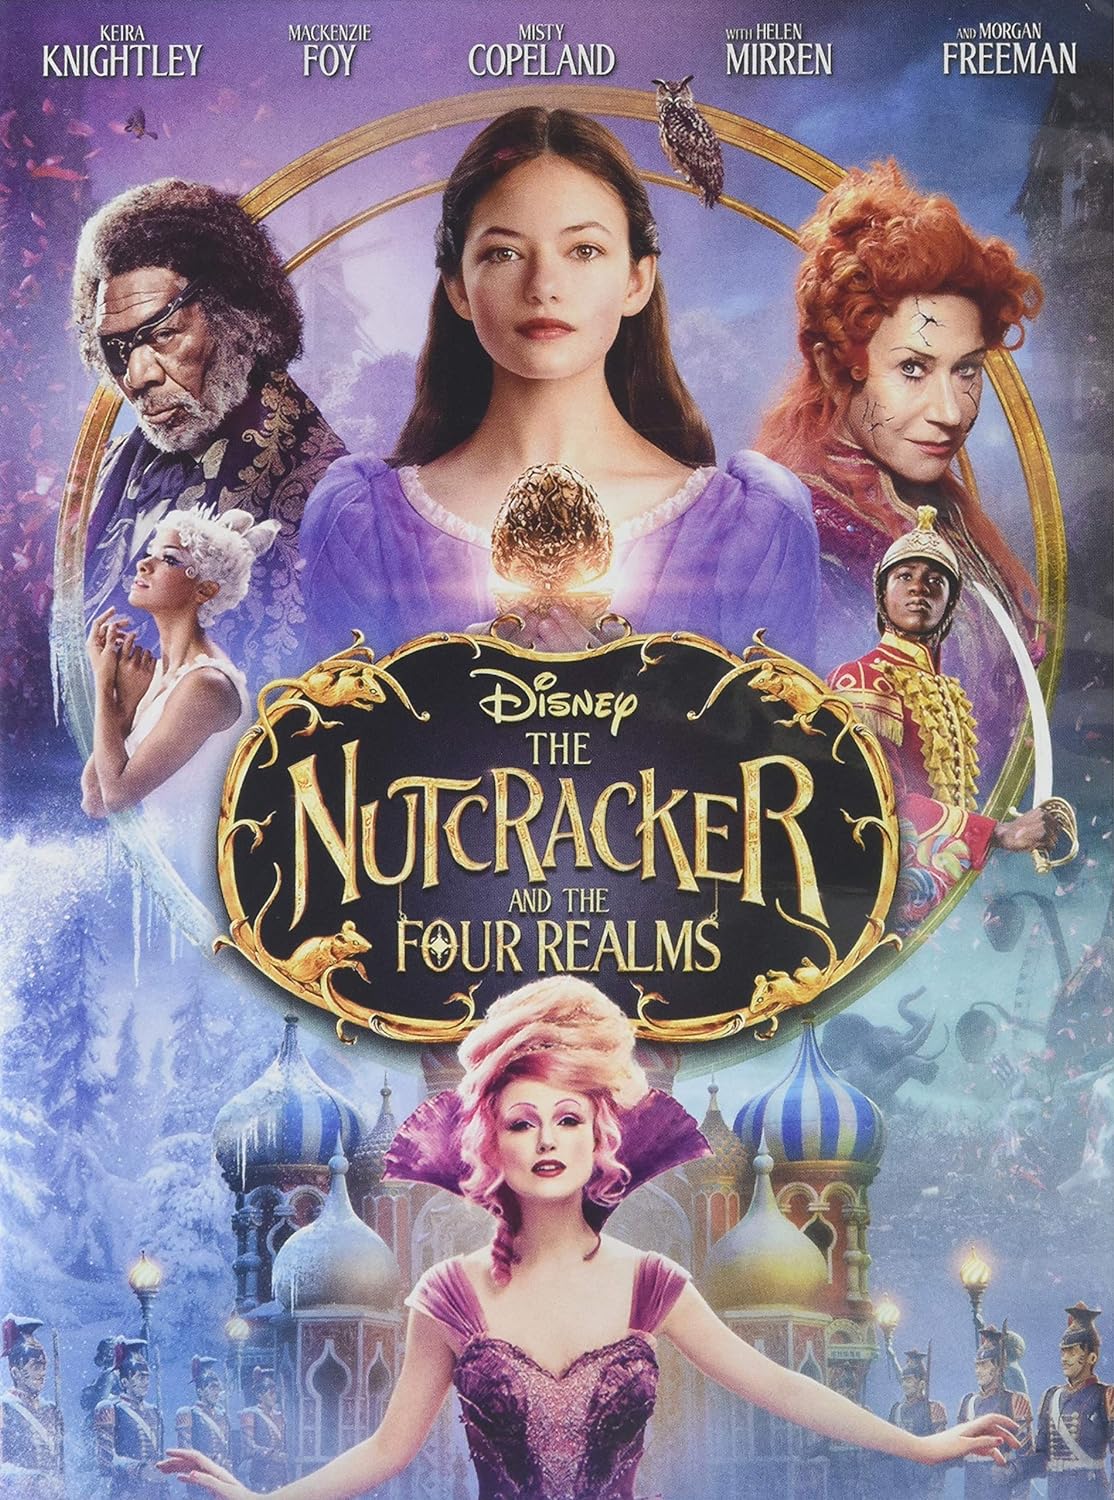 THE NUTCRACKER AND THE FOUR REALMS HD Digital Code (Movies Anywhere)